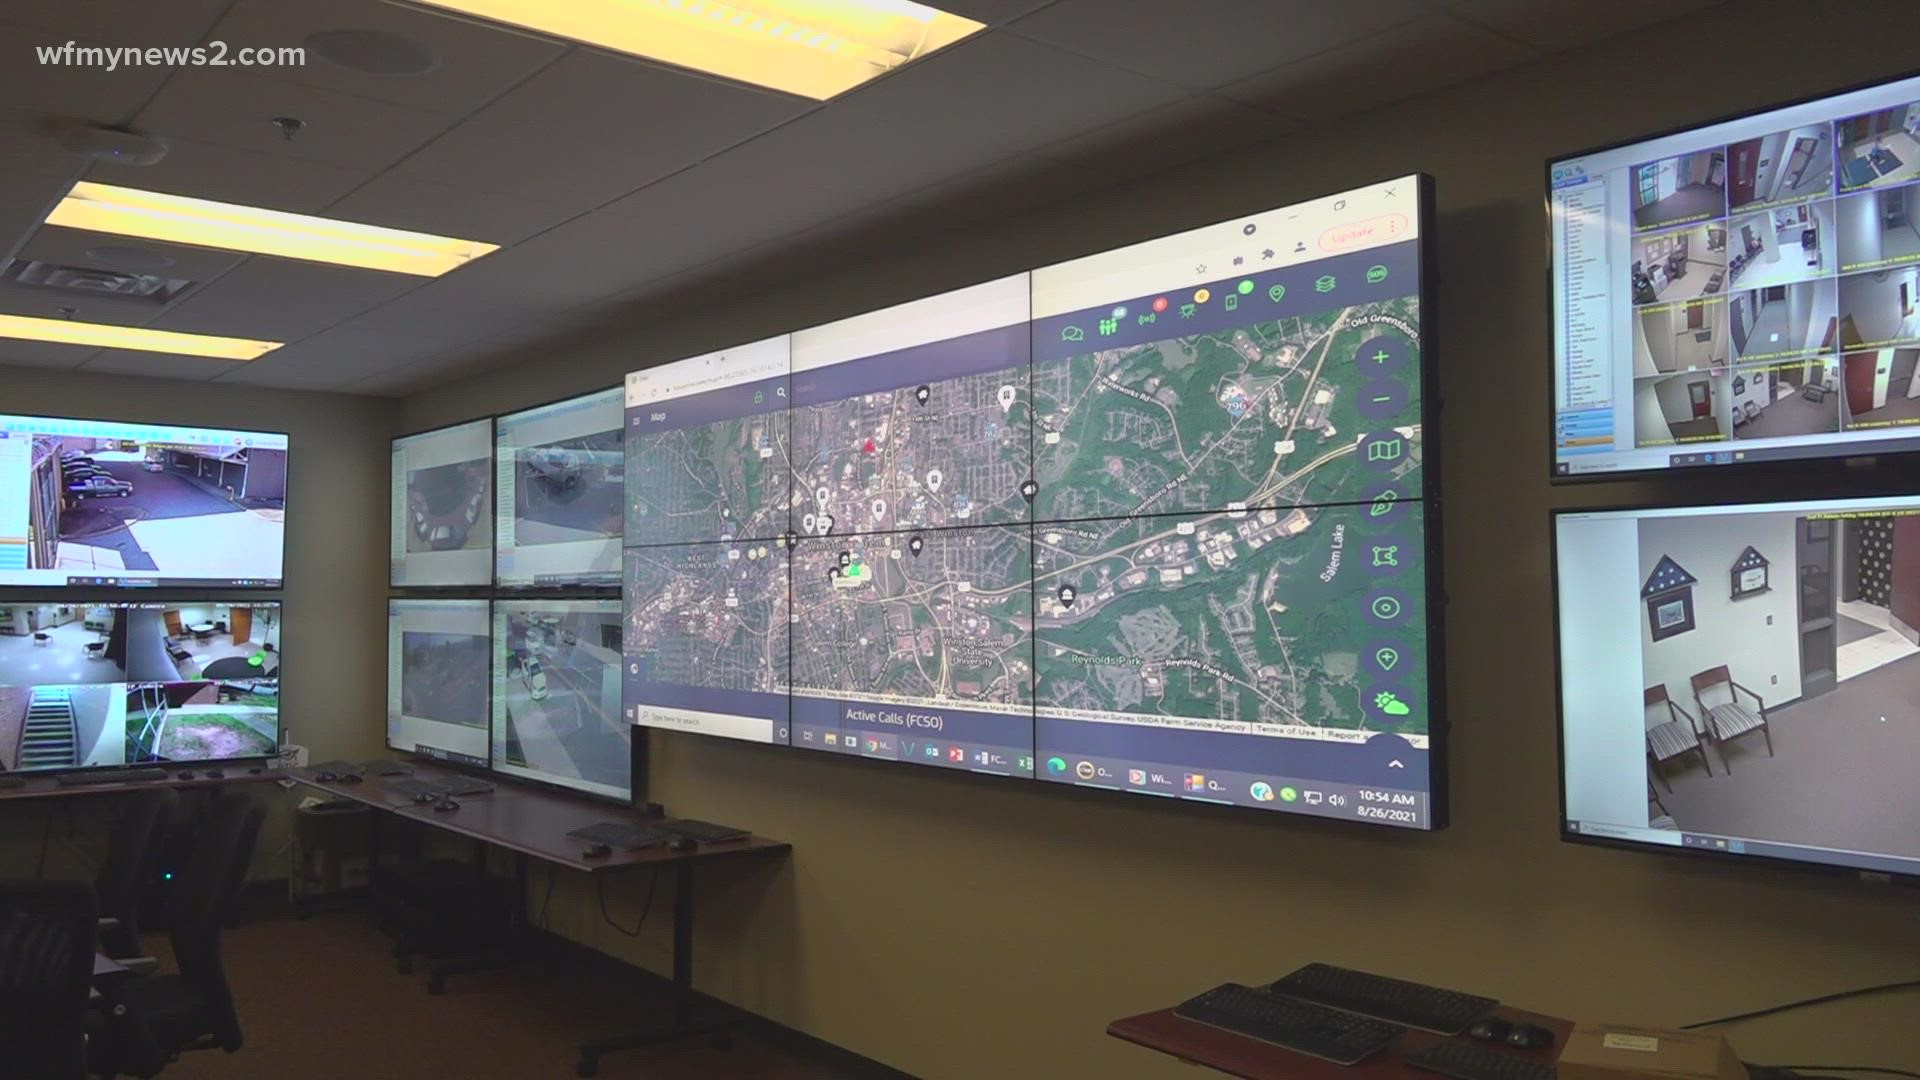 New technology would allow for the Guilford County Sheriff's Office and Greensboro police to access and view private and public cameras in the area of a crime.